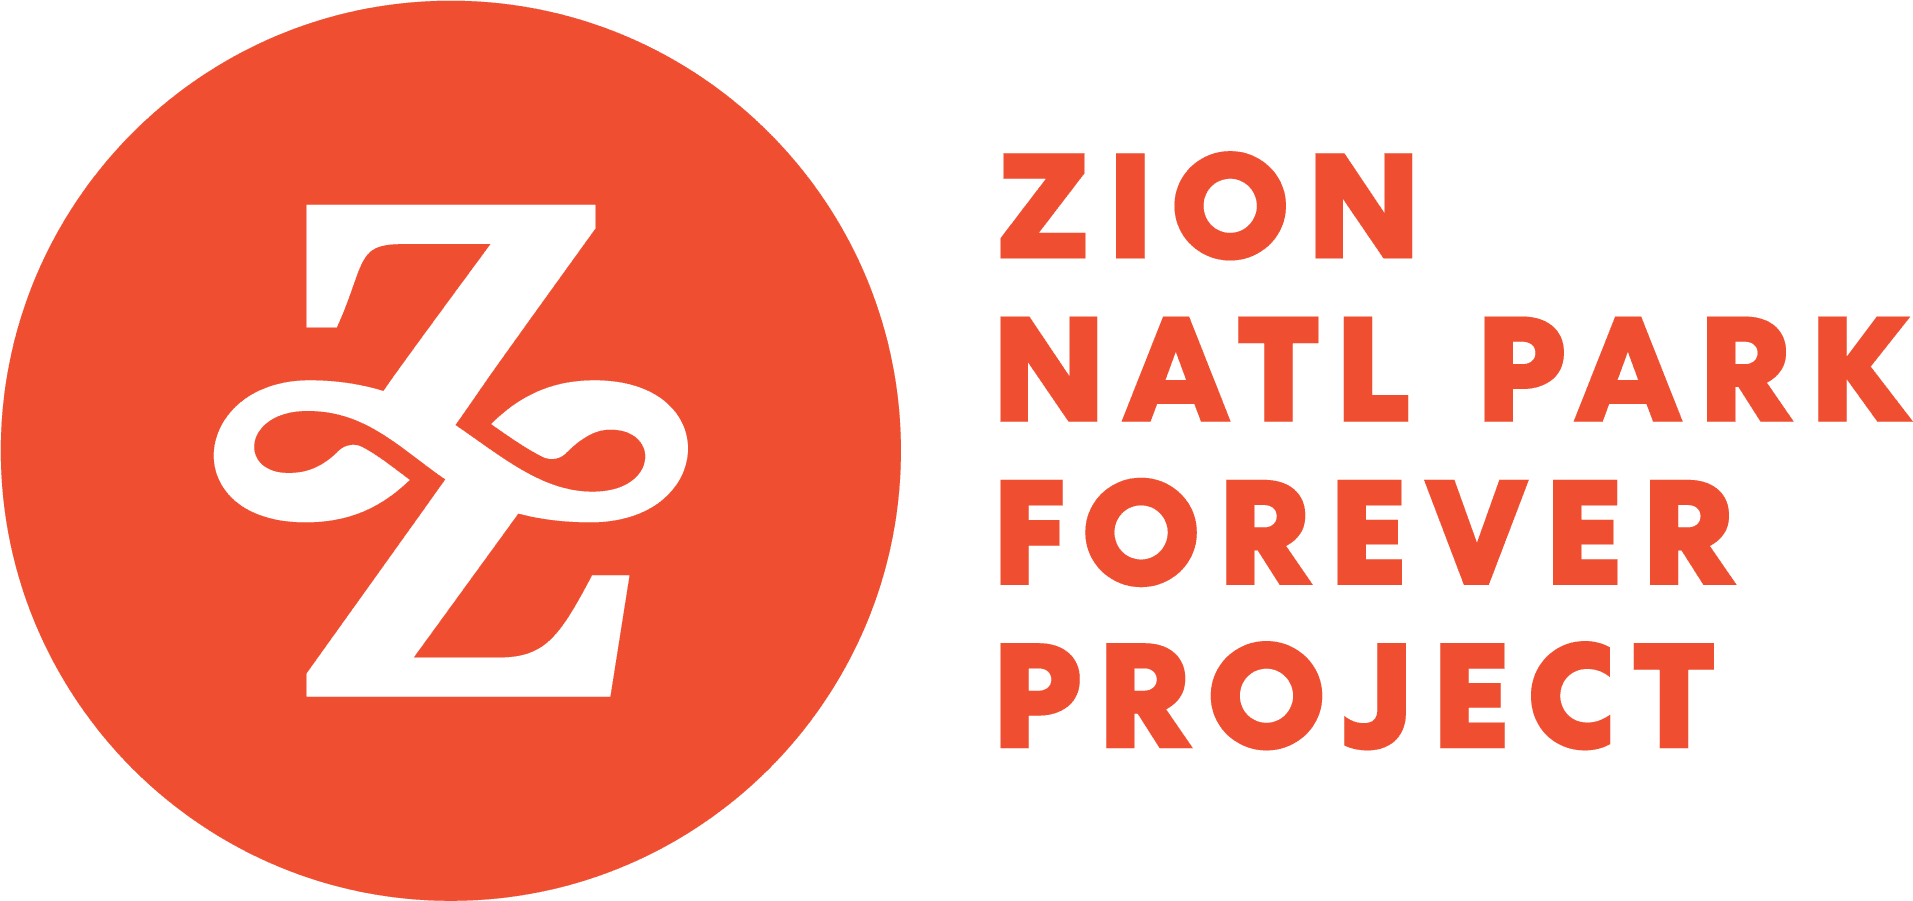 Adopt a Pika - Zion National Park Forever Project